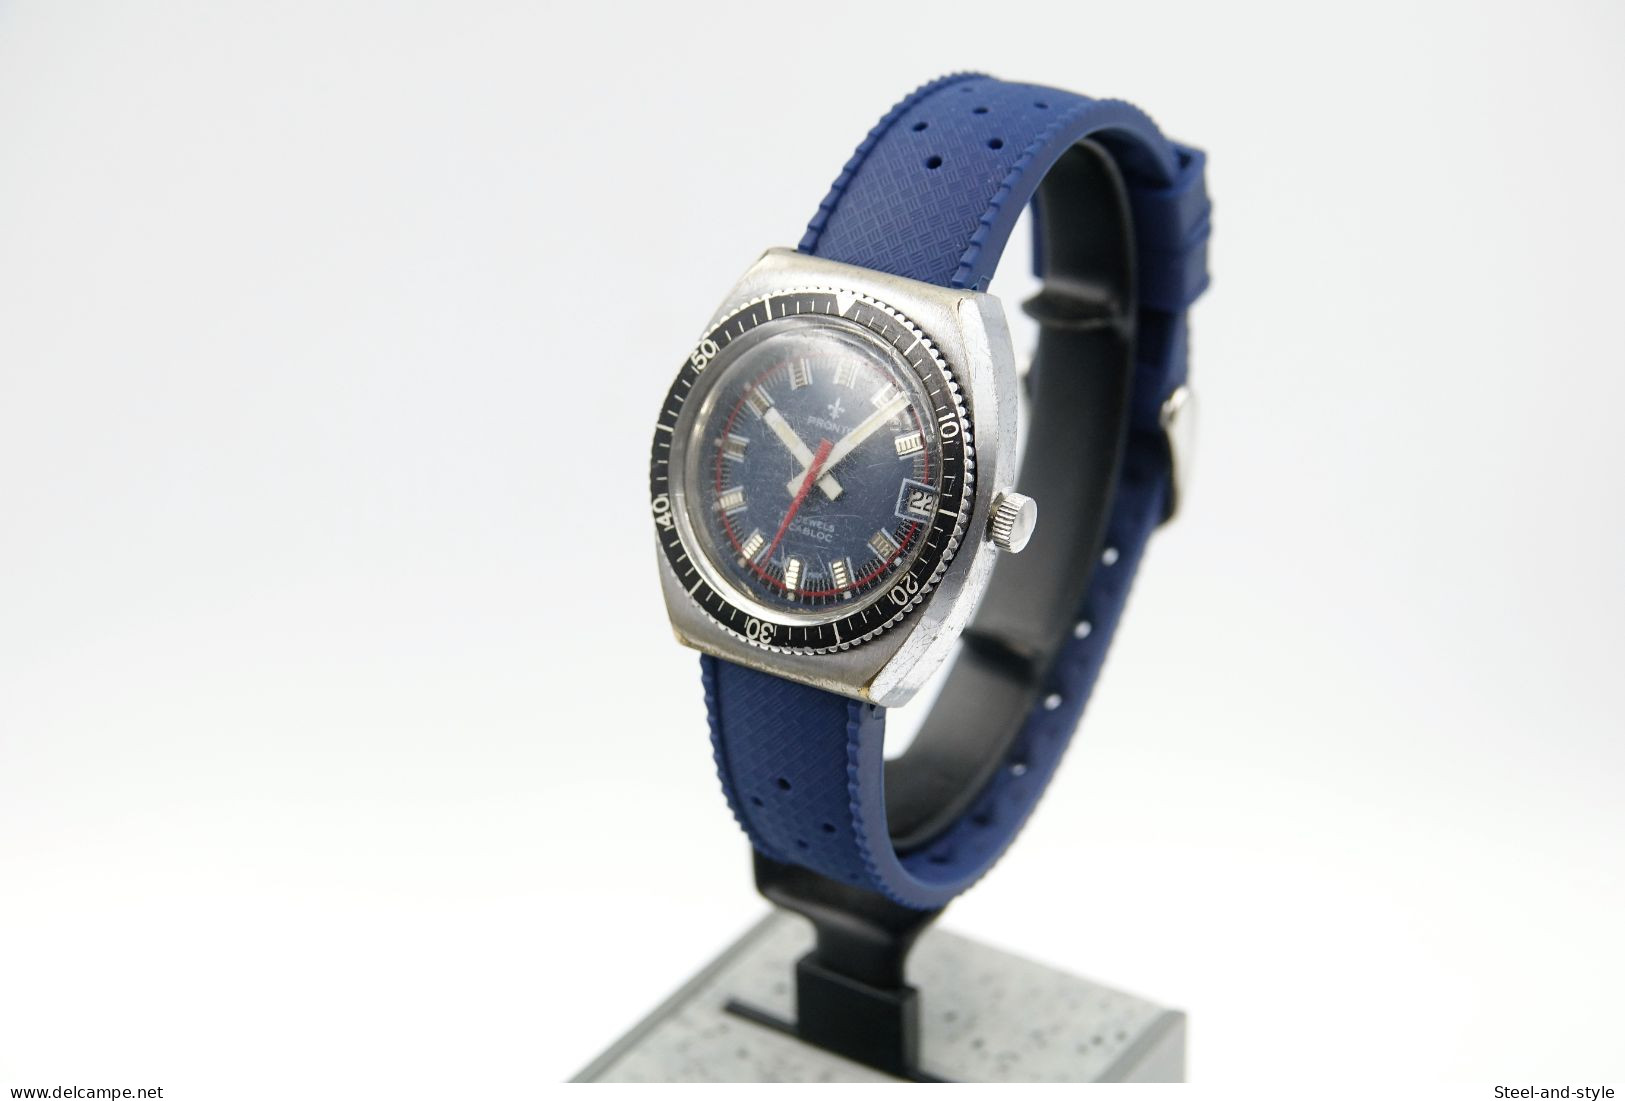 Watches : PRONTO HAND WIND DIVER BLUE DIAL Ref. 0419 - ULTRA RARE - Original - Running - Excelent Condition - Watches: Top-of-the-Line